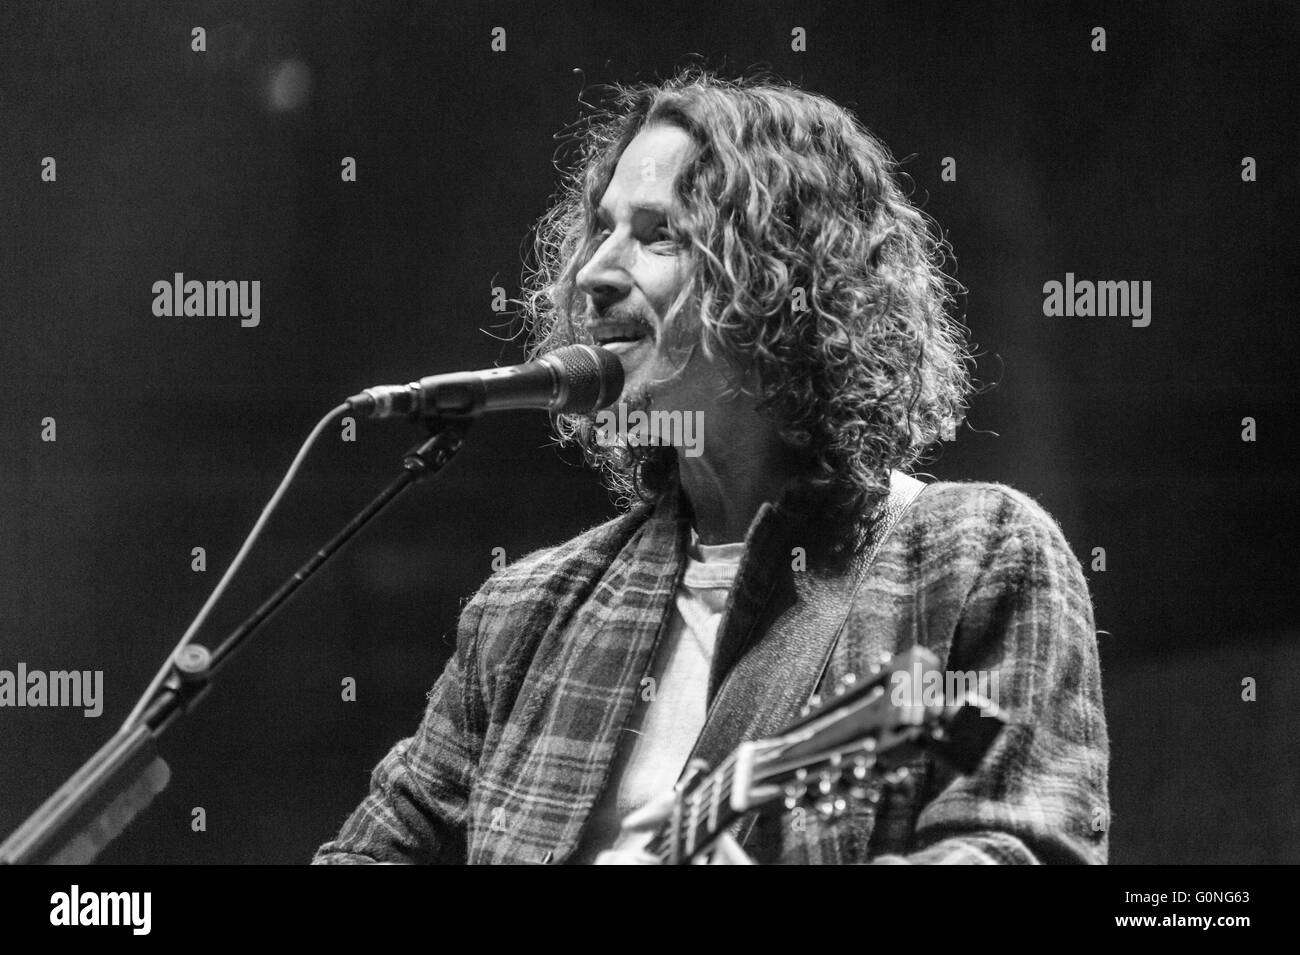 Chris Cornell on his “Higher Truth” Tour, live at Birmingham’s Symphony Hall, on Monday 2nd May 2016 Stock Photo